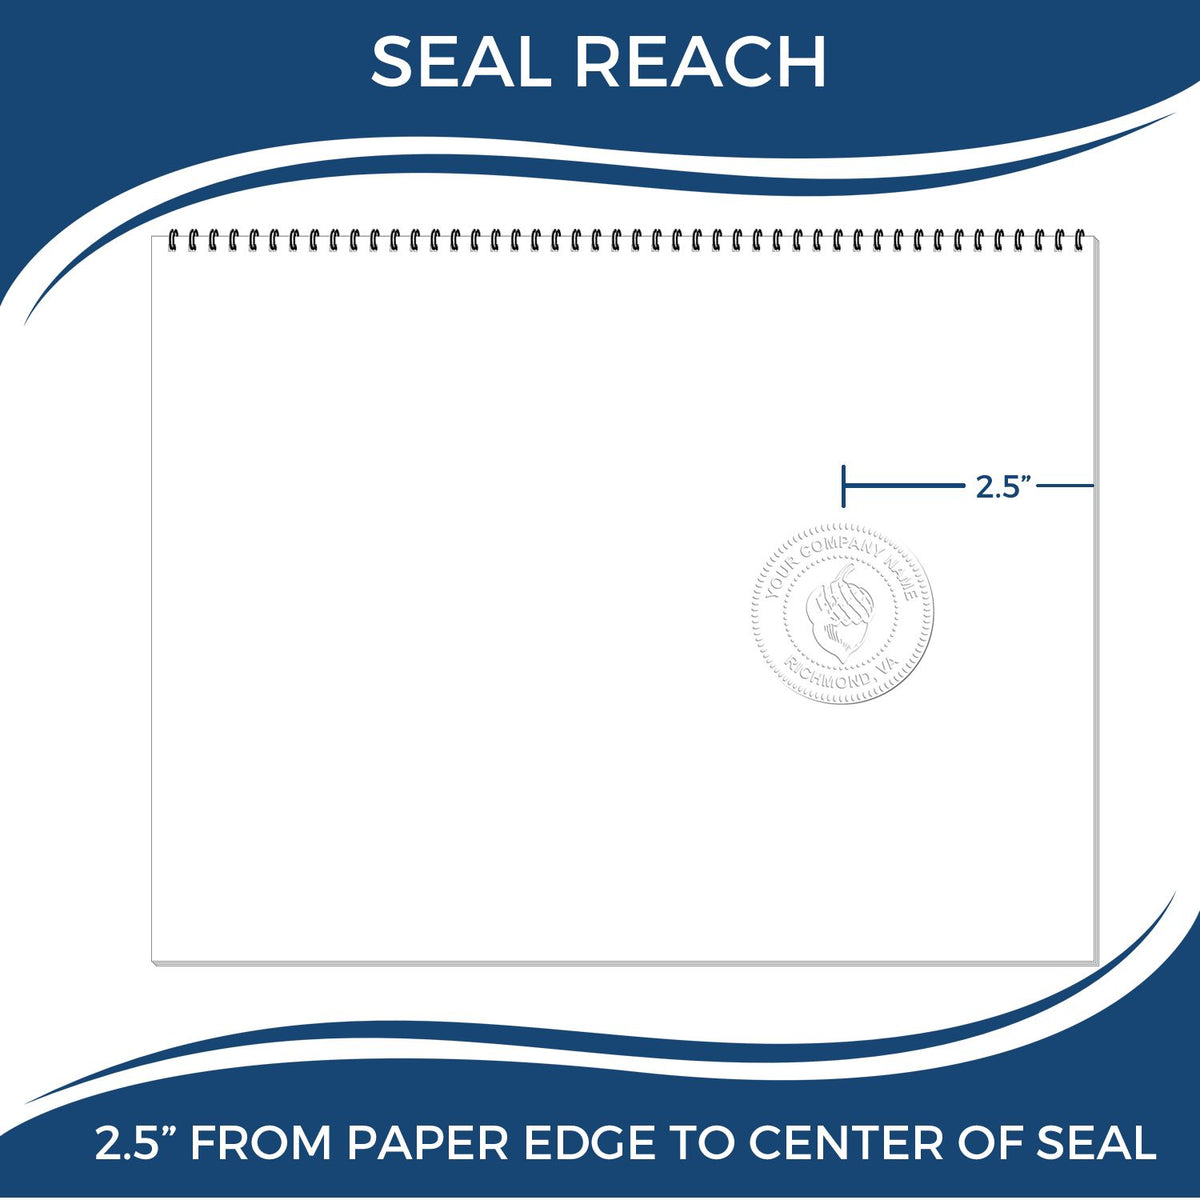 An infographic showing the seal reach which is represented by a ruler and a miniature seal image of the Heavy Duty Cast Iron Maryland Architect Embosser